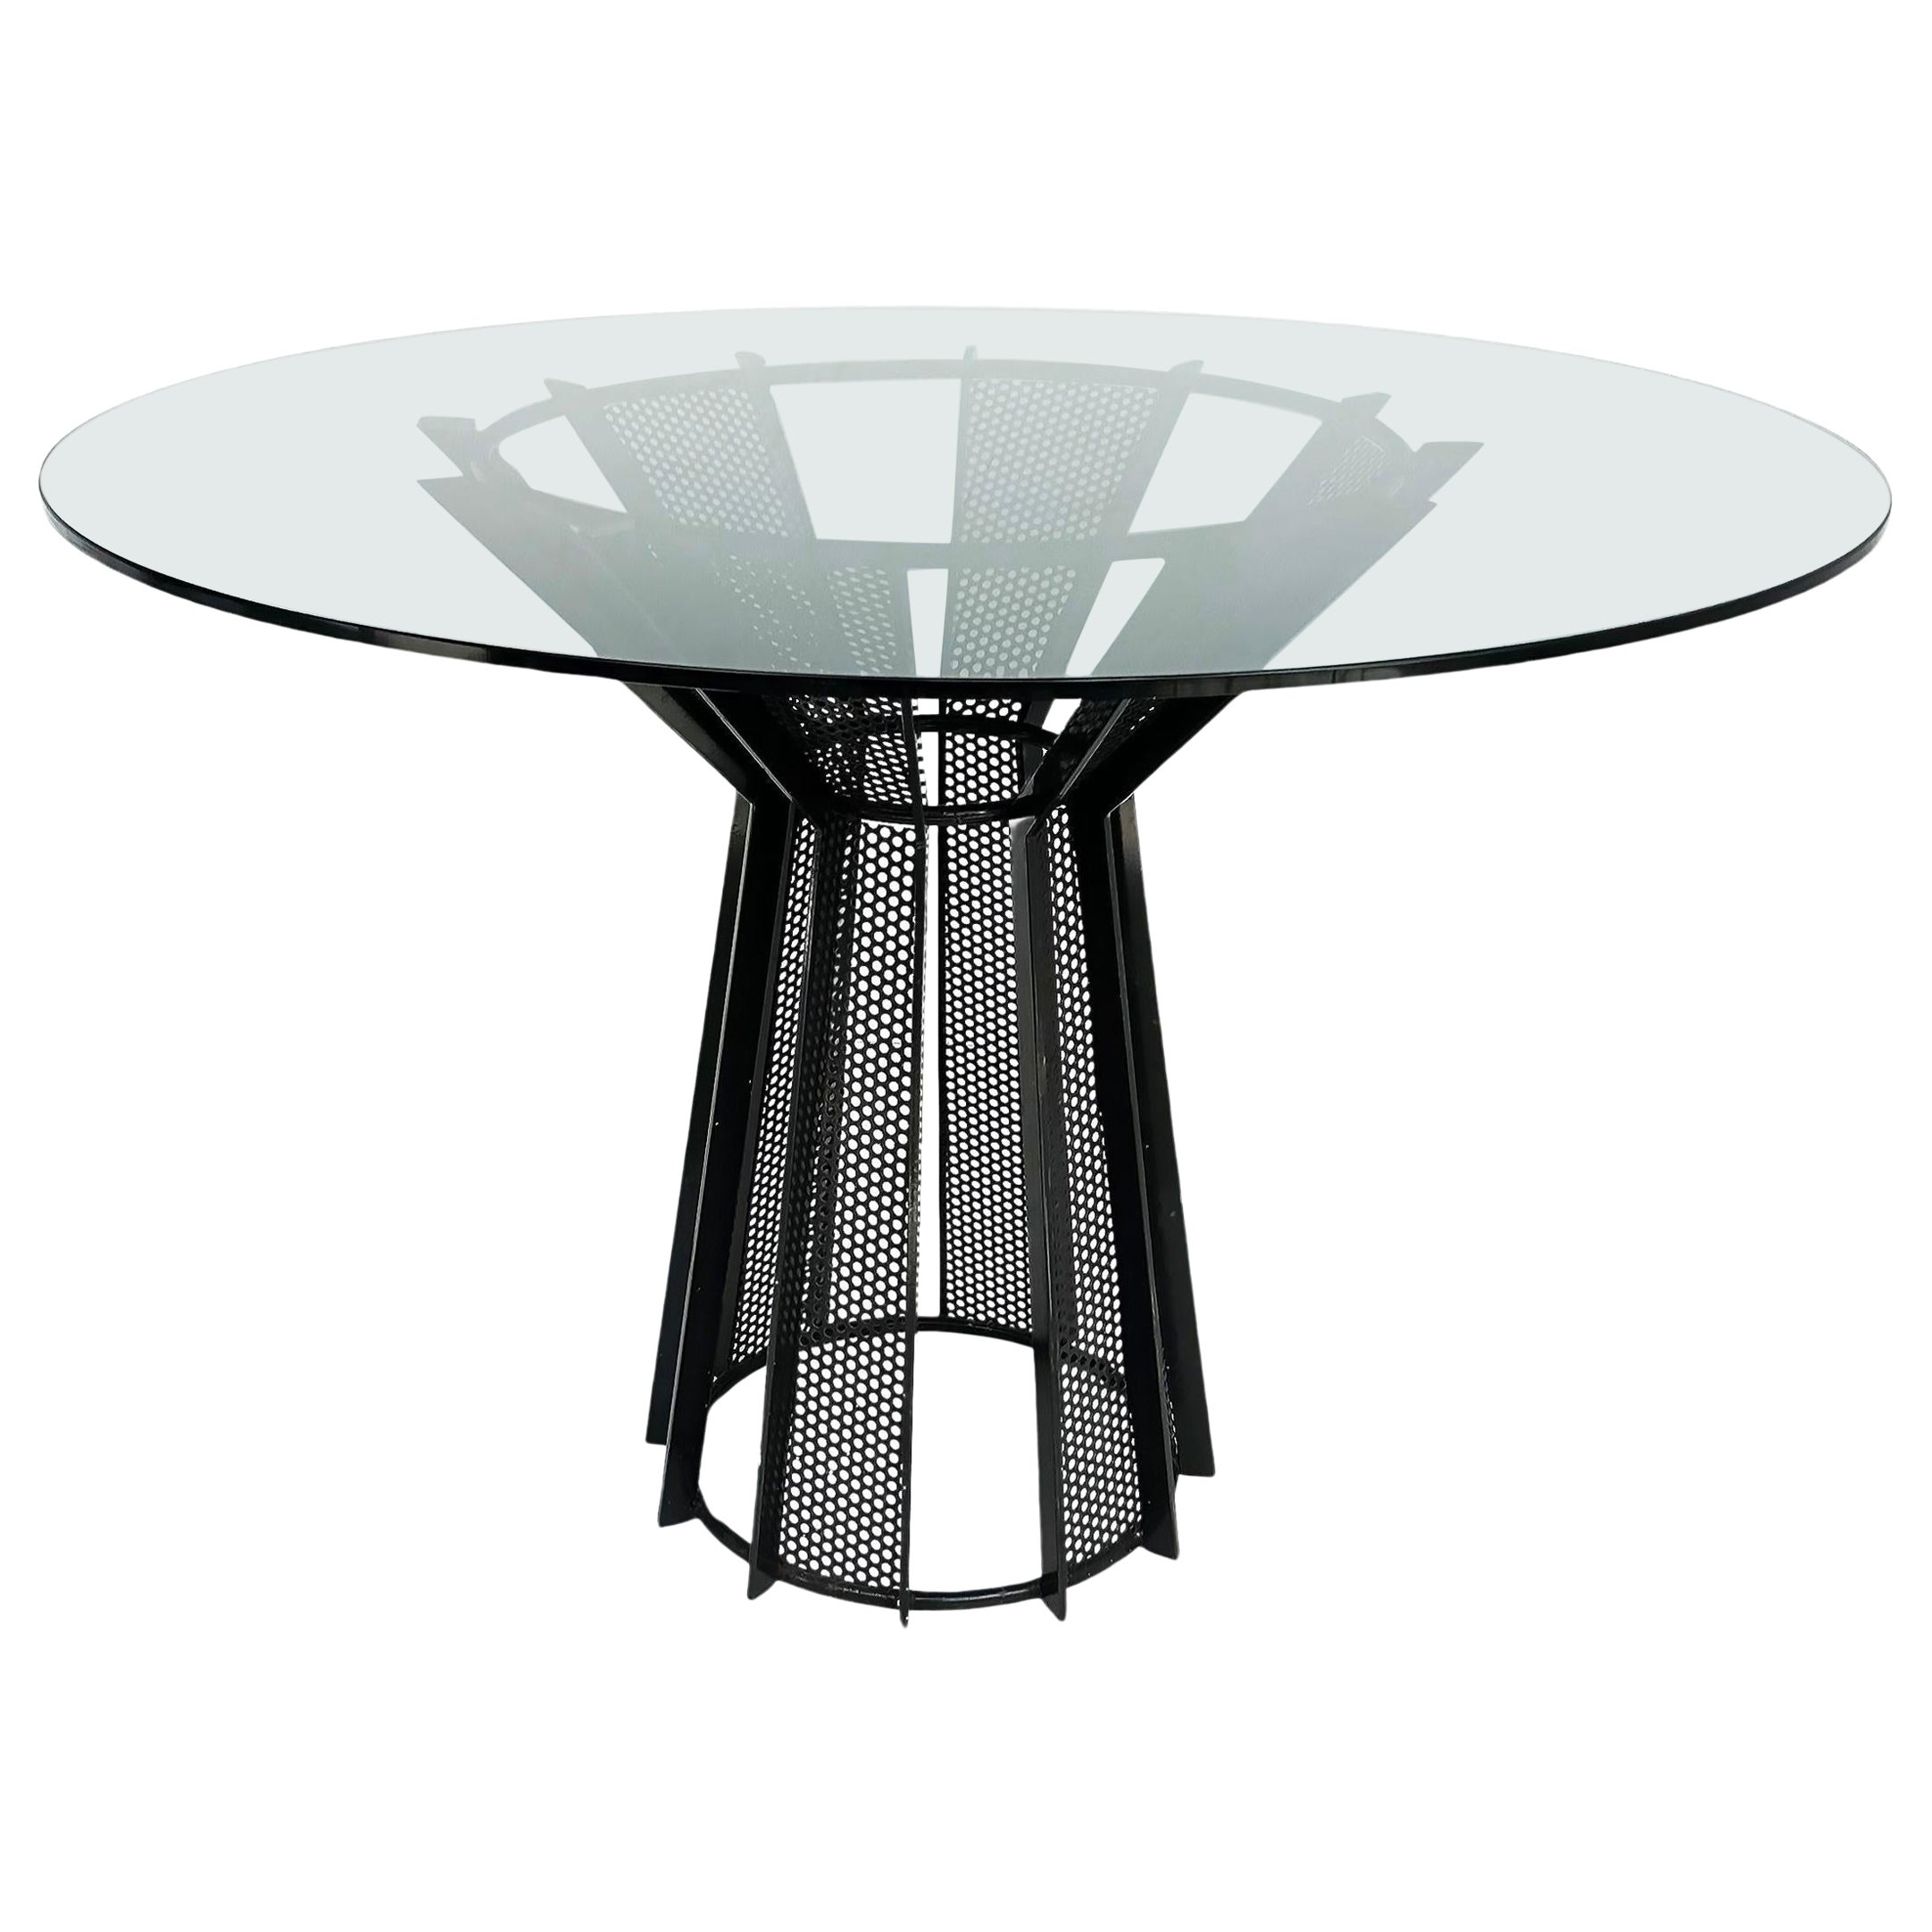 James De Wulf Metal Harvest Dining Table Base, Glass Top For Sale